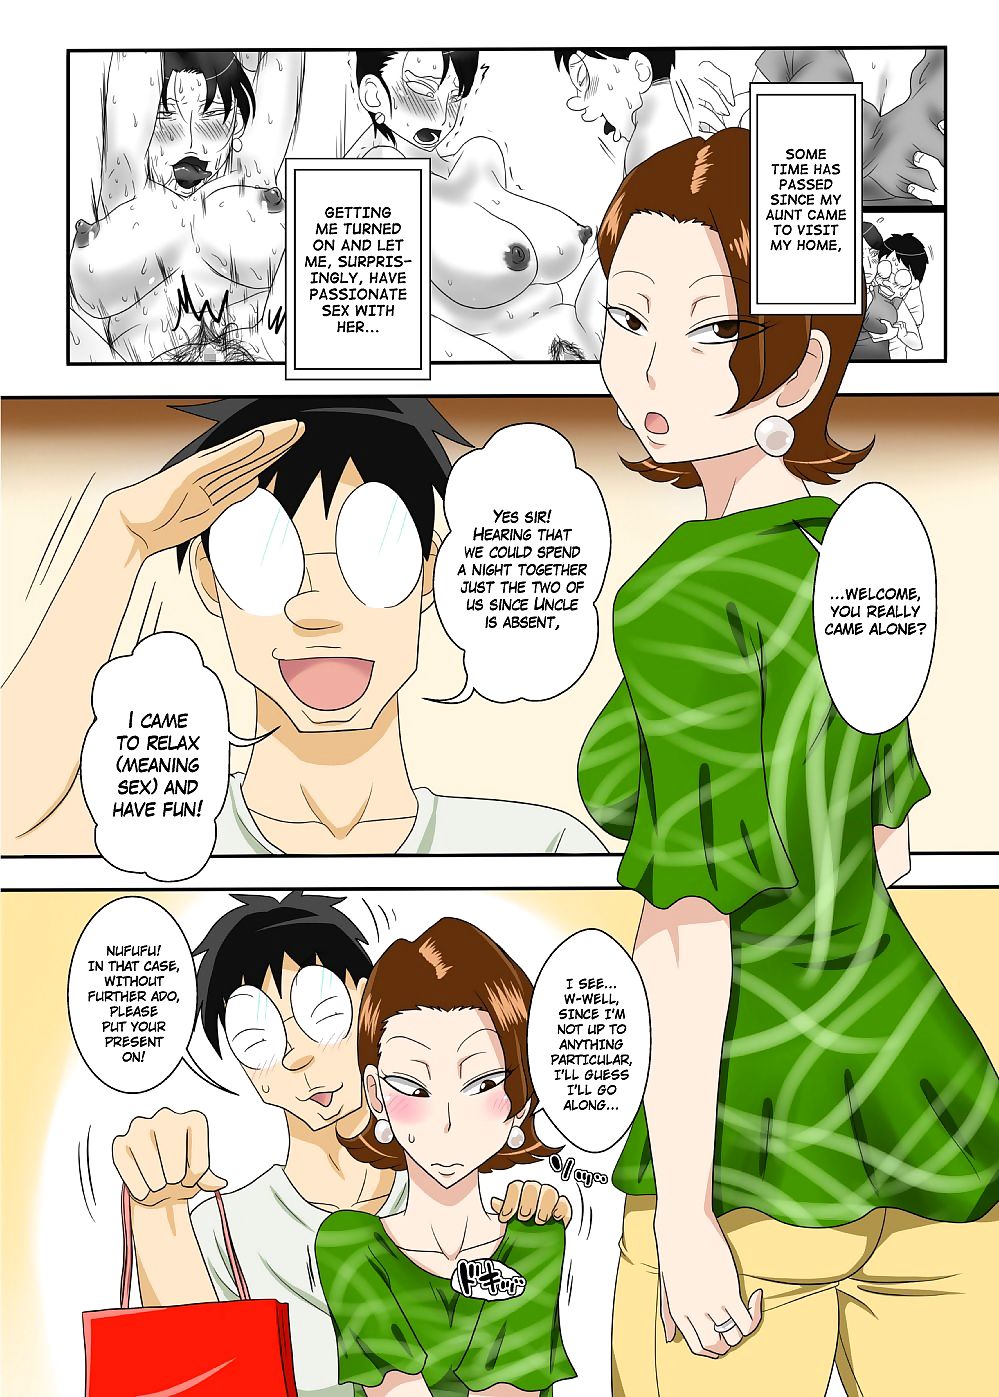 Dripping With Sweat At Aunts Place-Hentai page 1